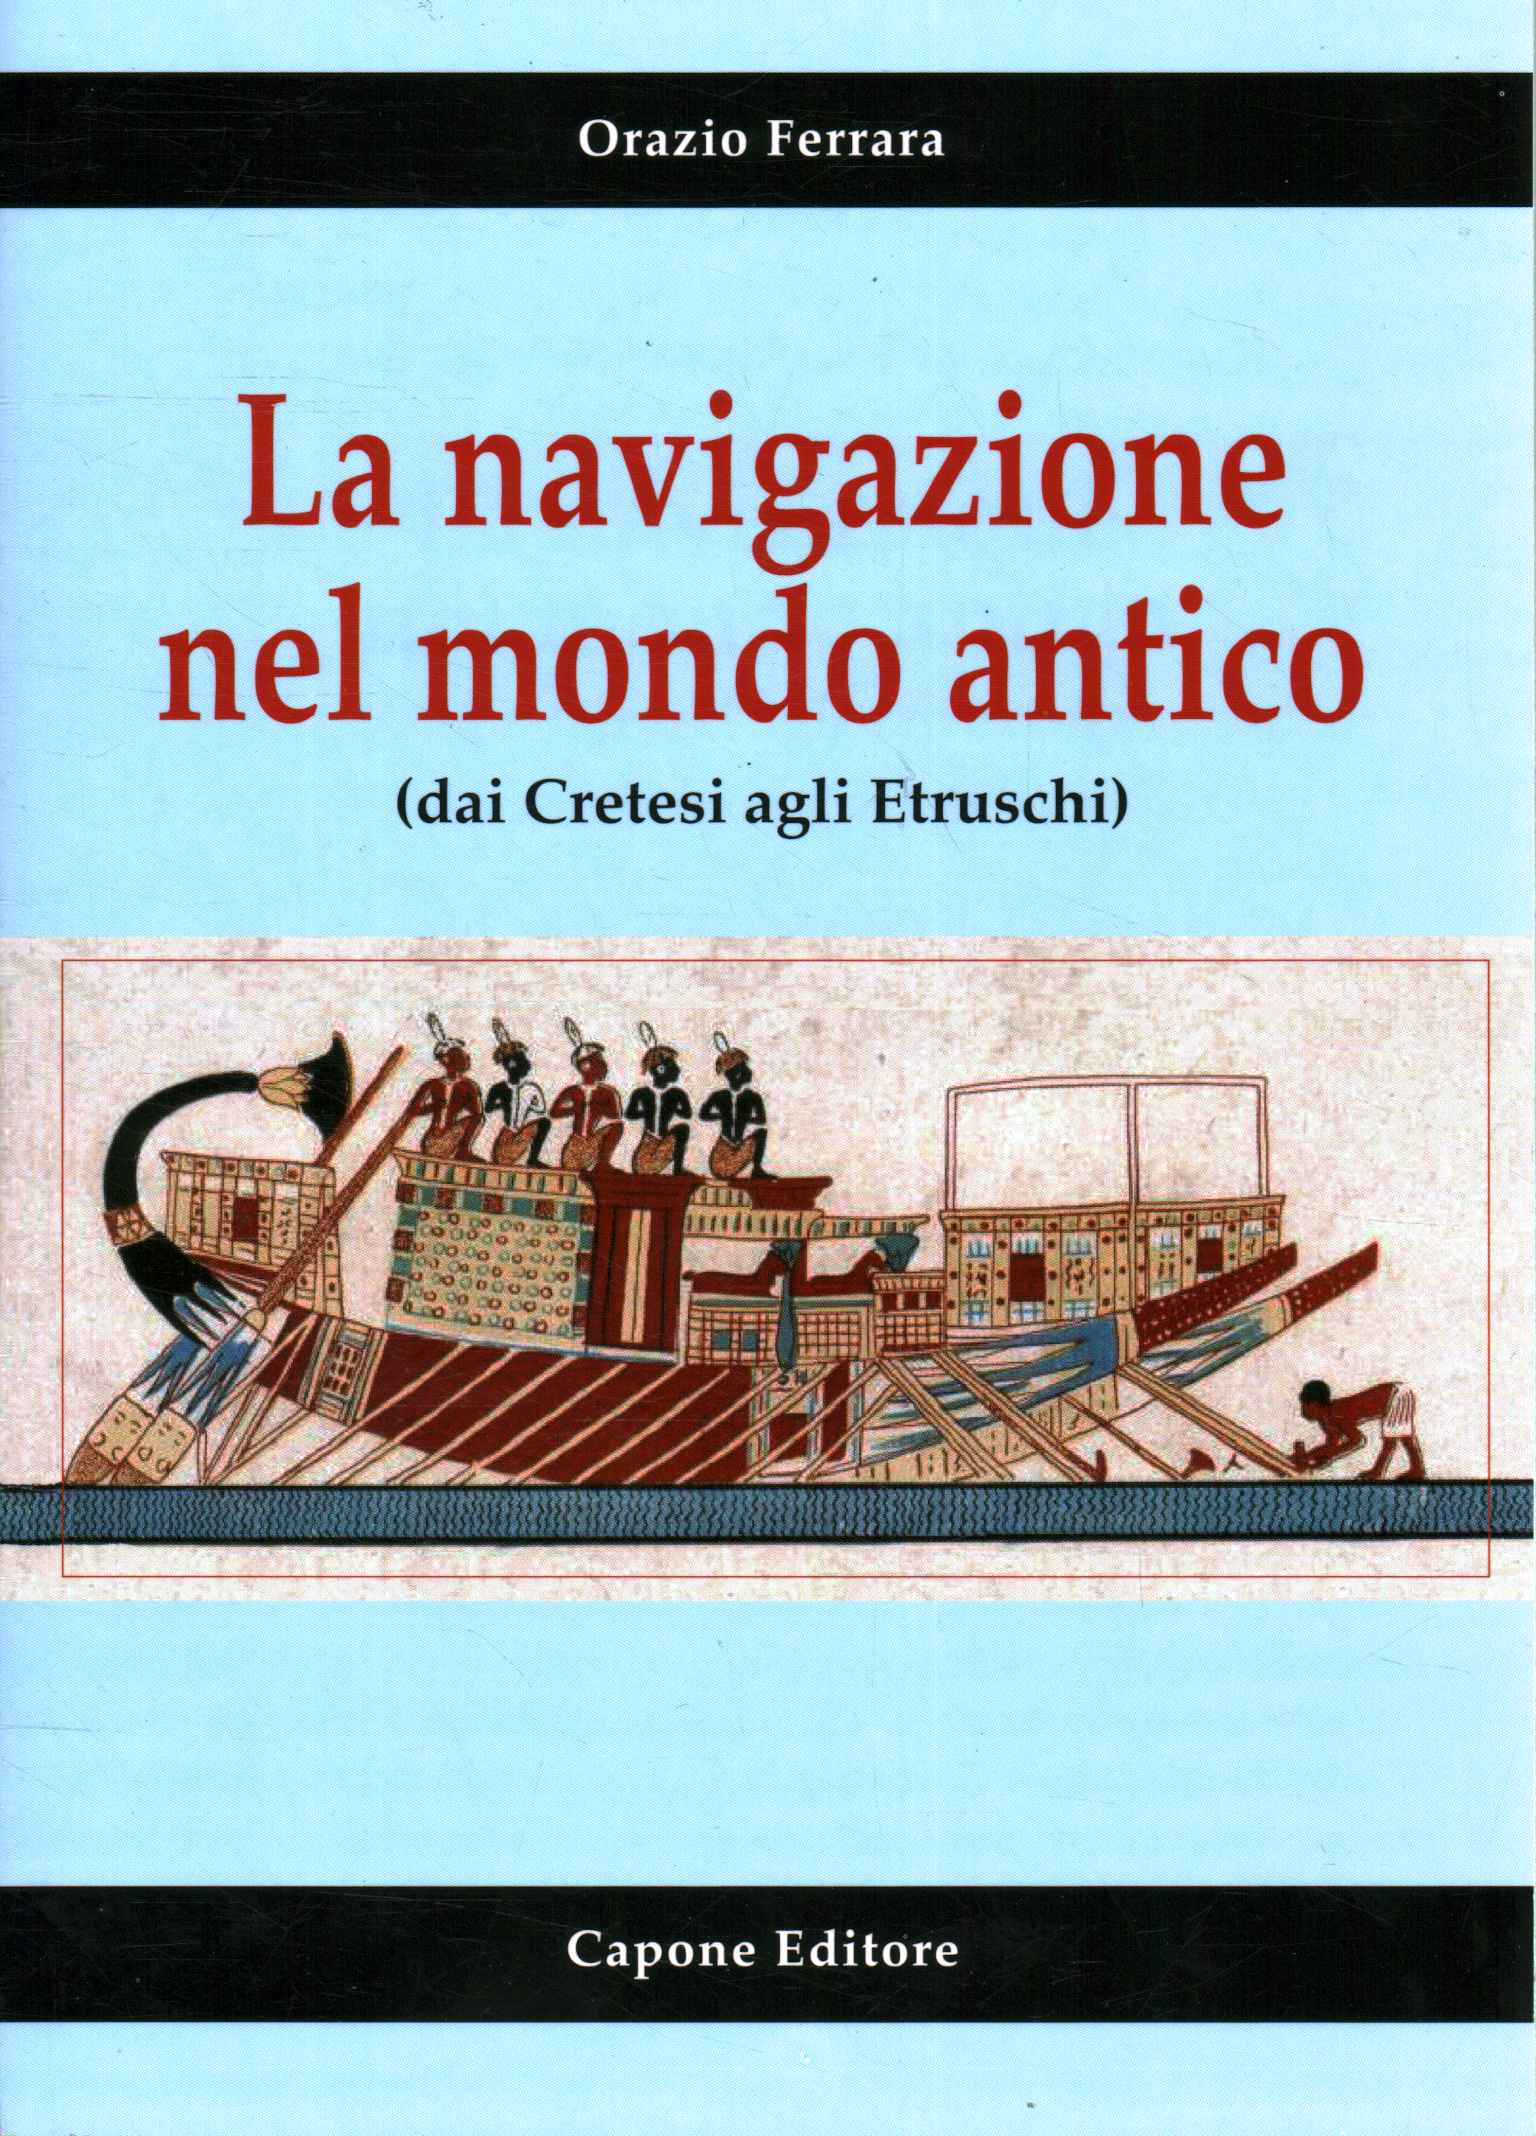 Navigation in the ancient world